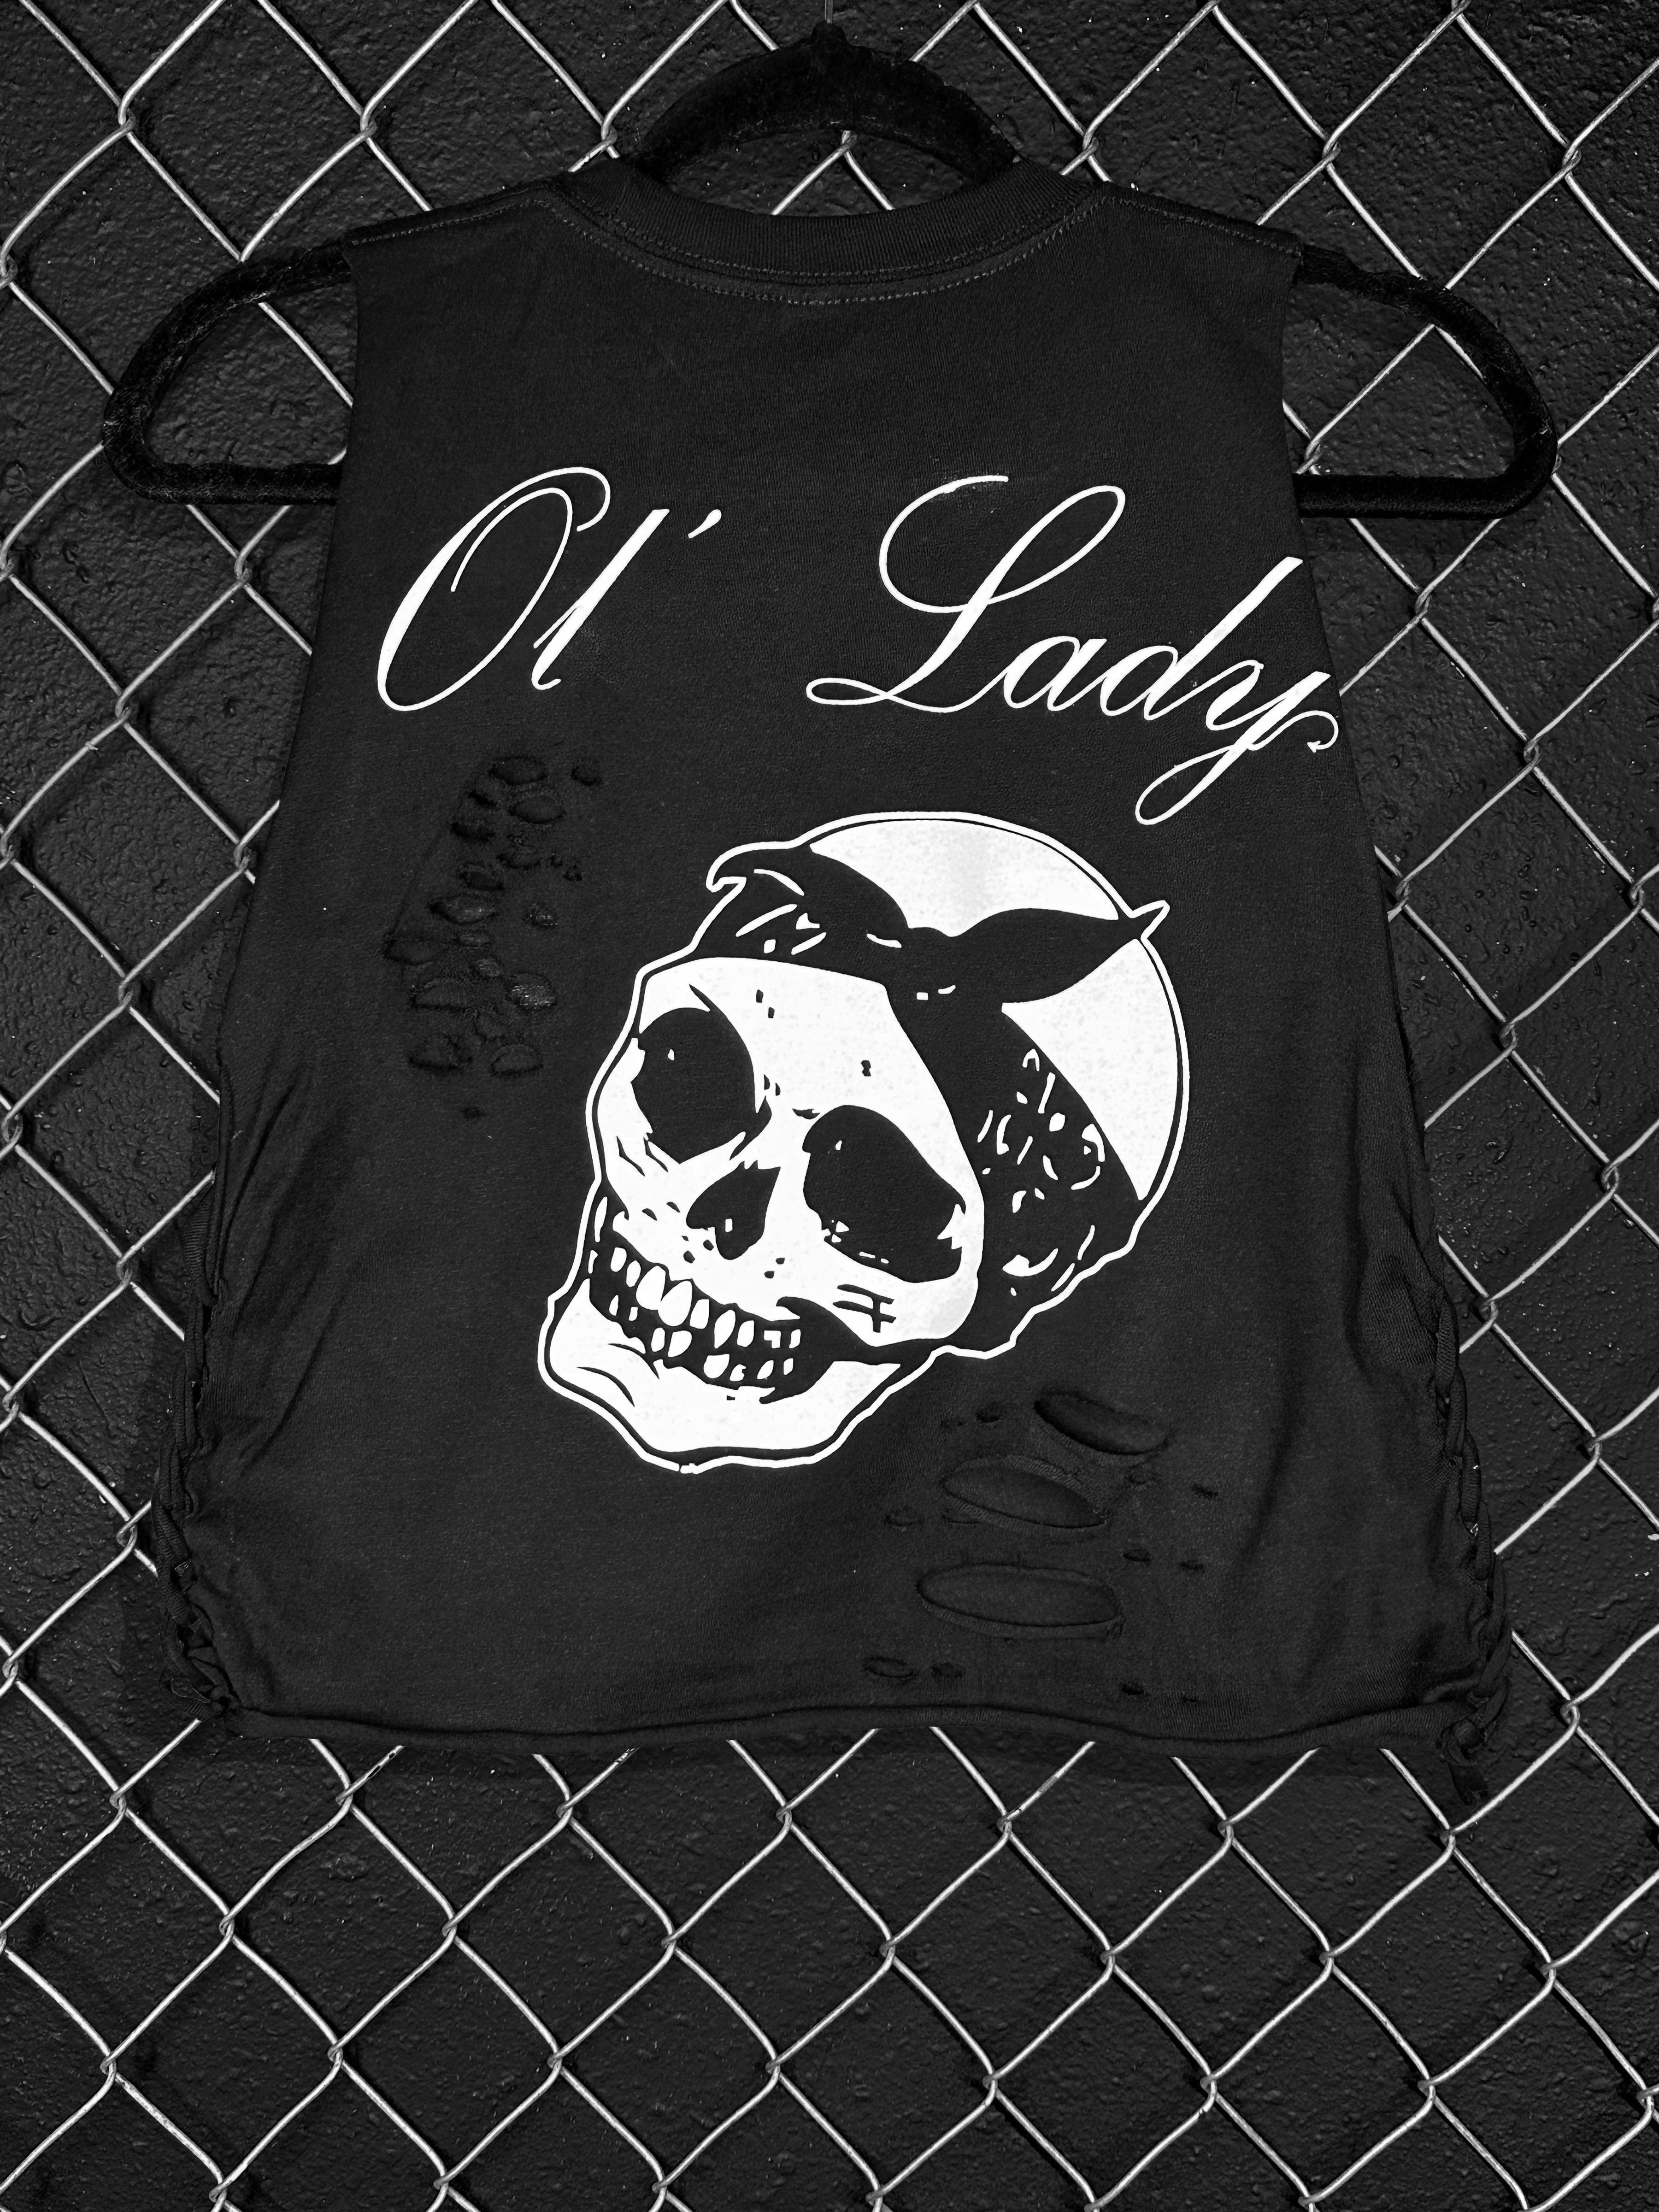 OL LADY CROP TANK TOP - The Drive Clothing